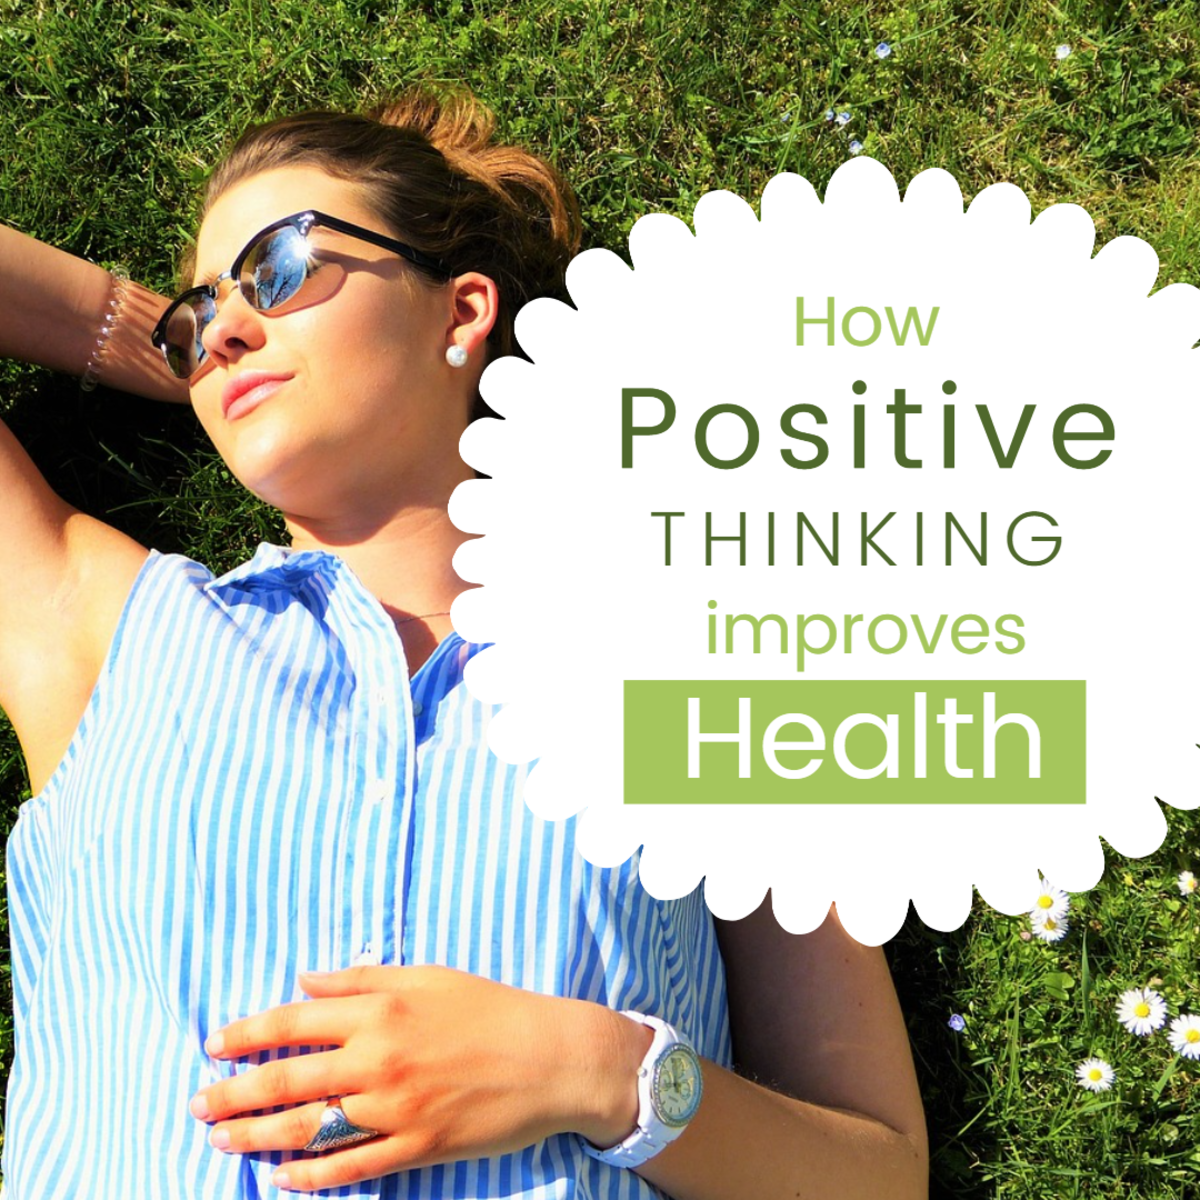 Focusing on positive and happy thoughts create amazing changes in our chemical balance that reduce stress and positively affect our health and well-being.